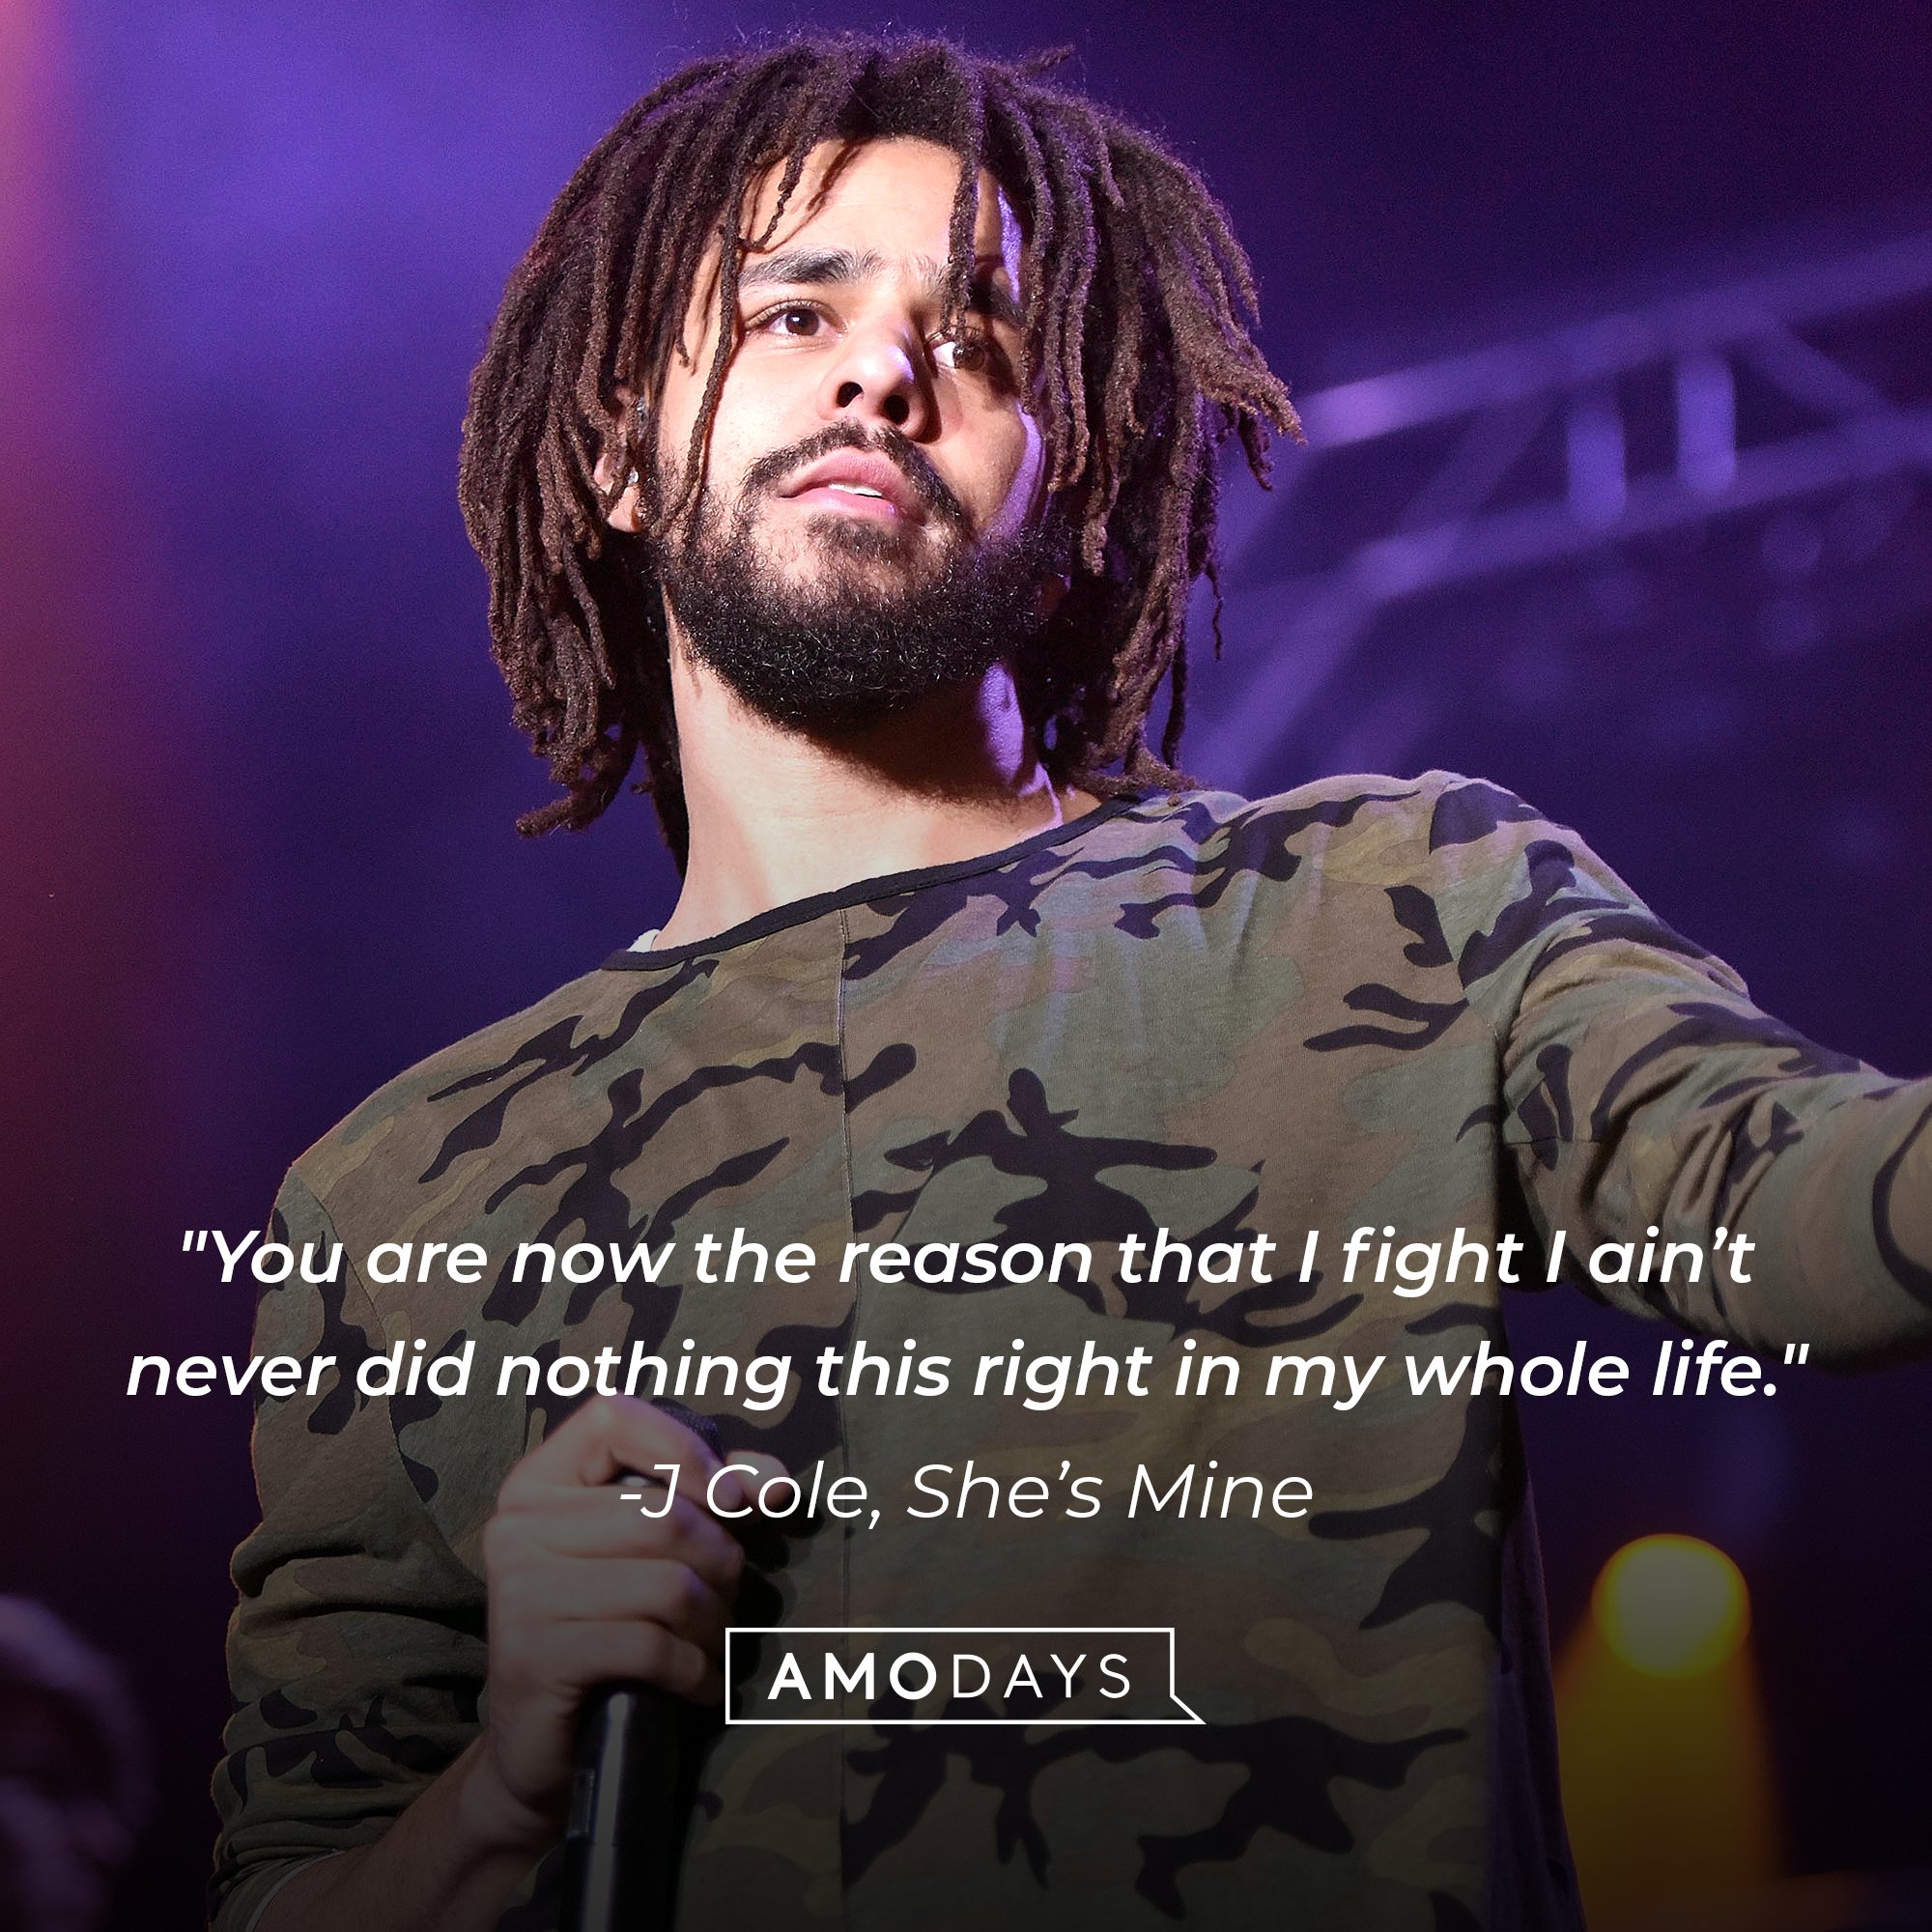 J Cole's quote: "You are now the reason that I fight I ain’t never did nothing this right in my whole life." | Image: AmoDays